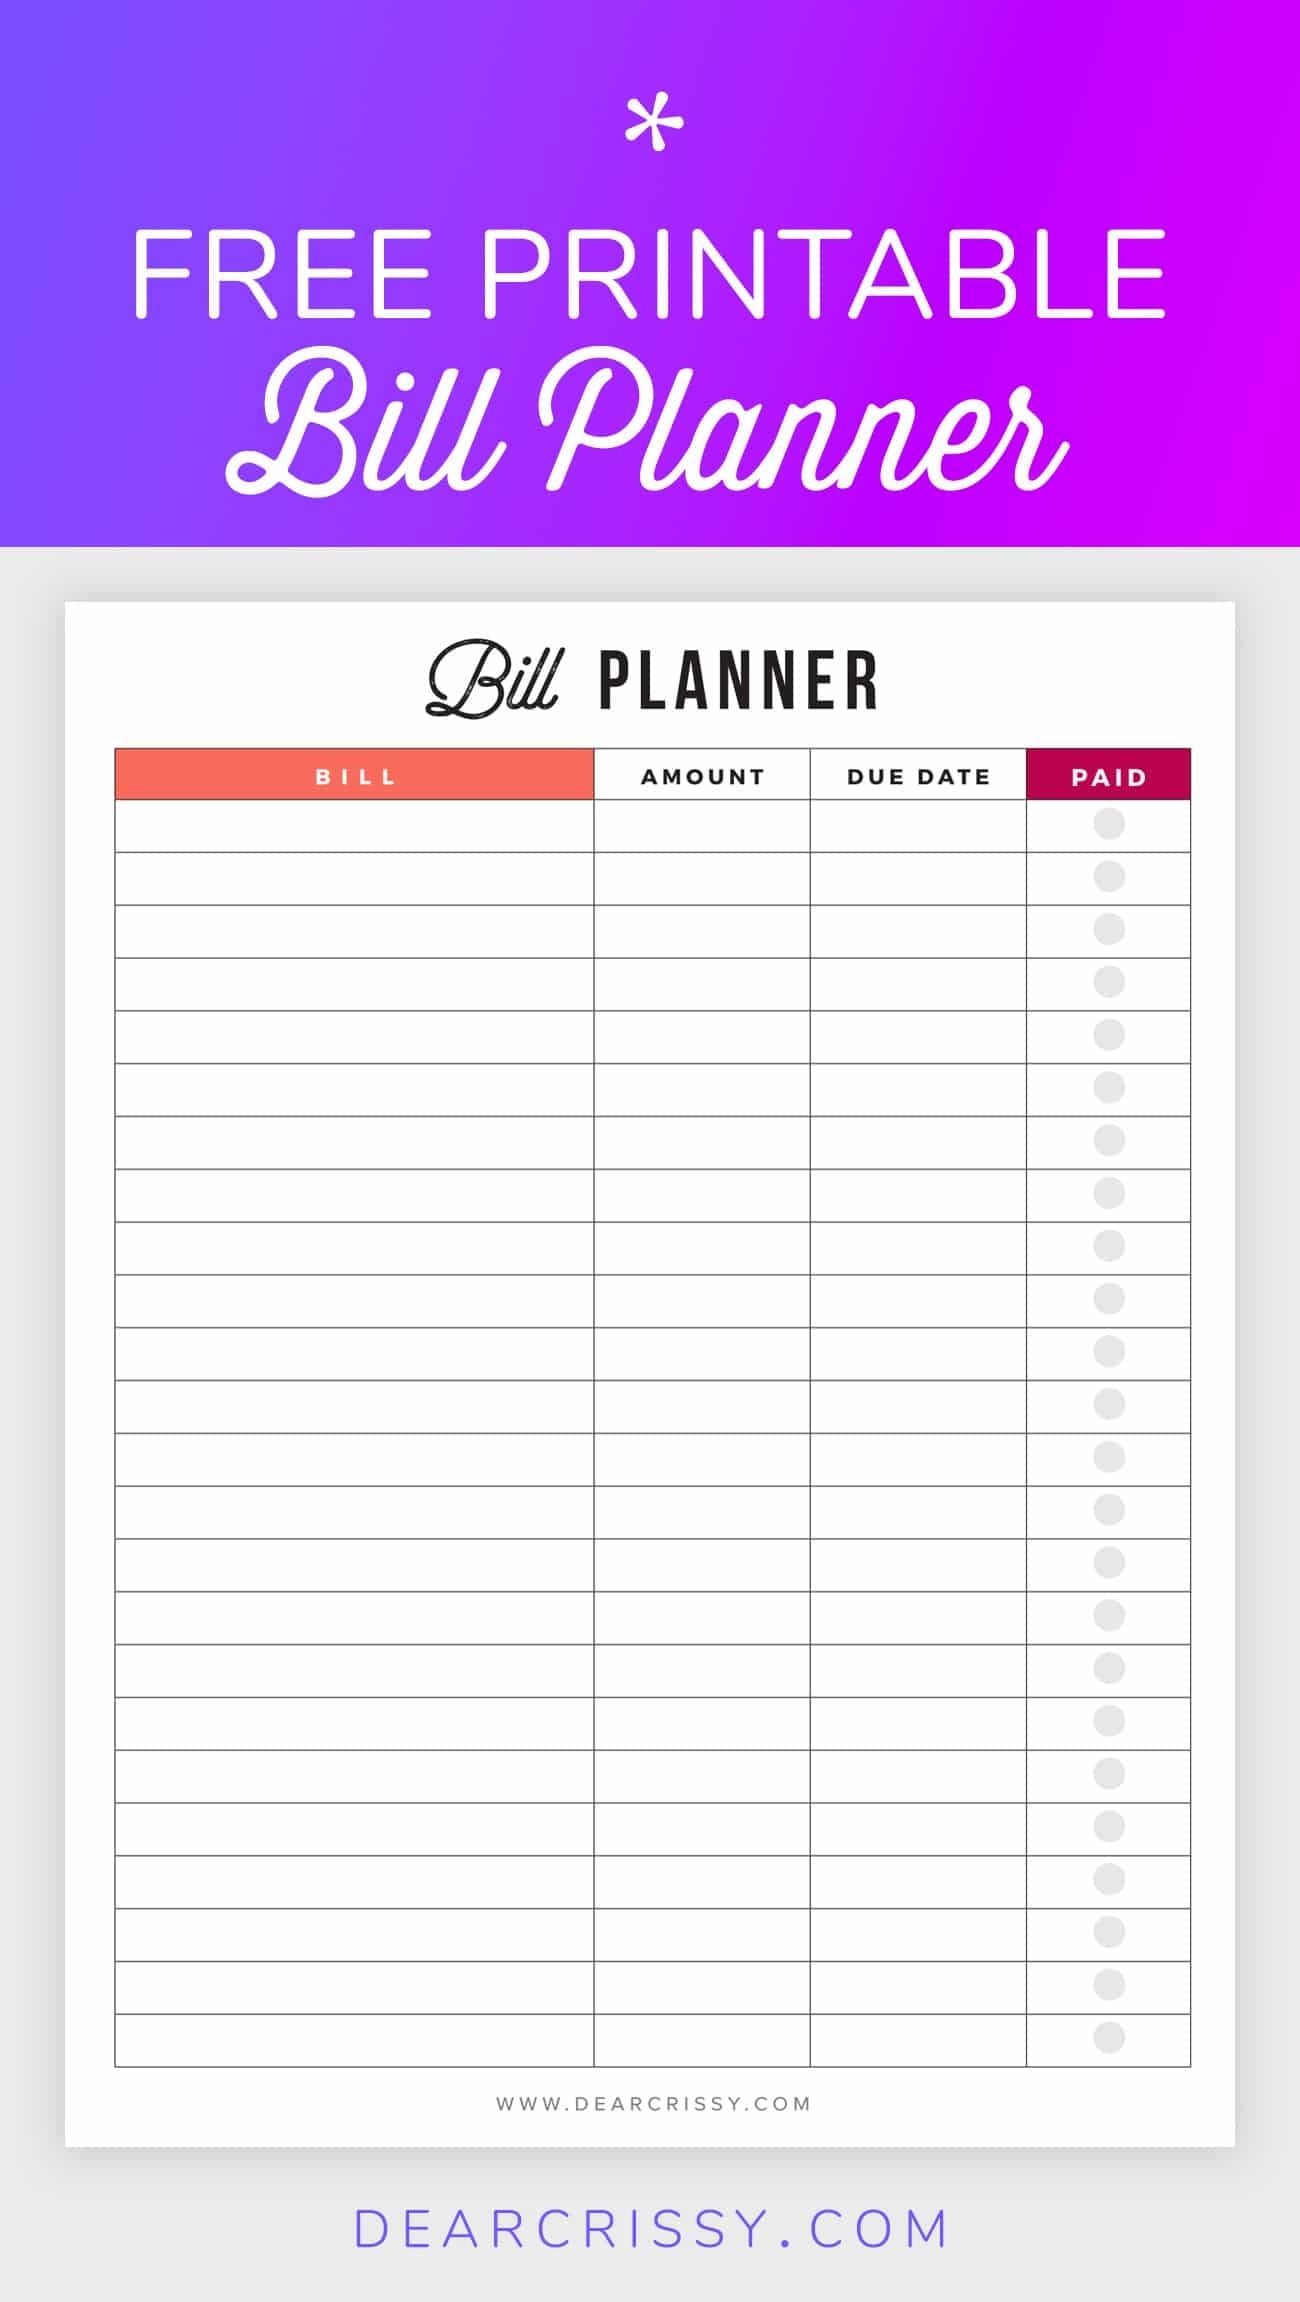 Bill Planner Printable - Pay Down Your Bills This Year!  Free Printable Monthly Bill Pay